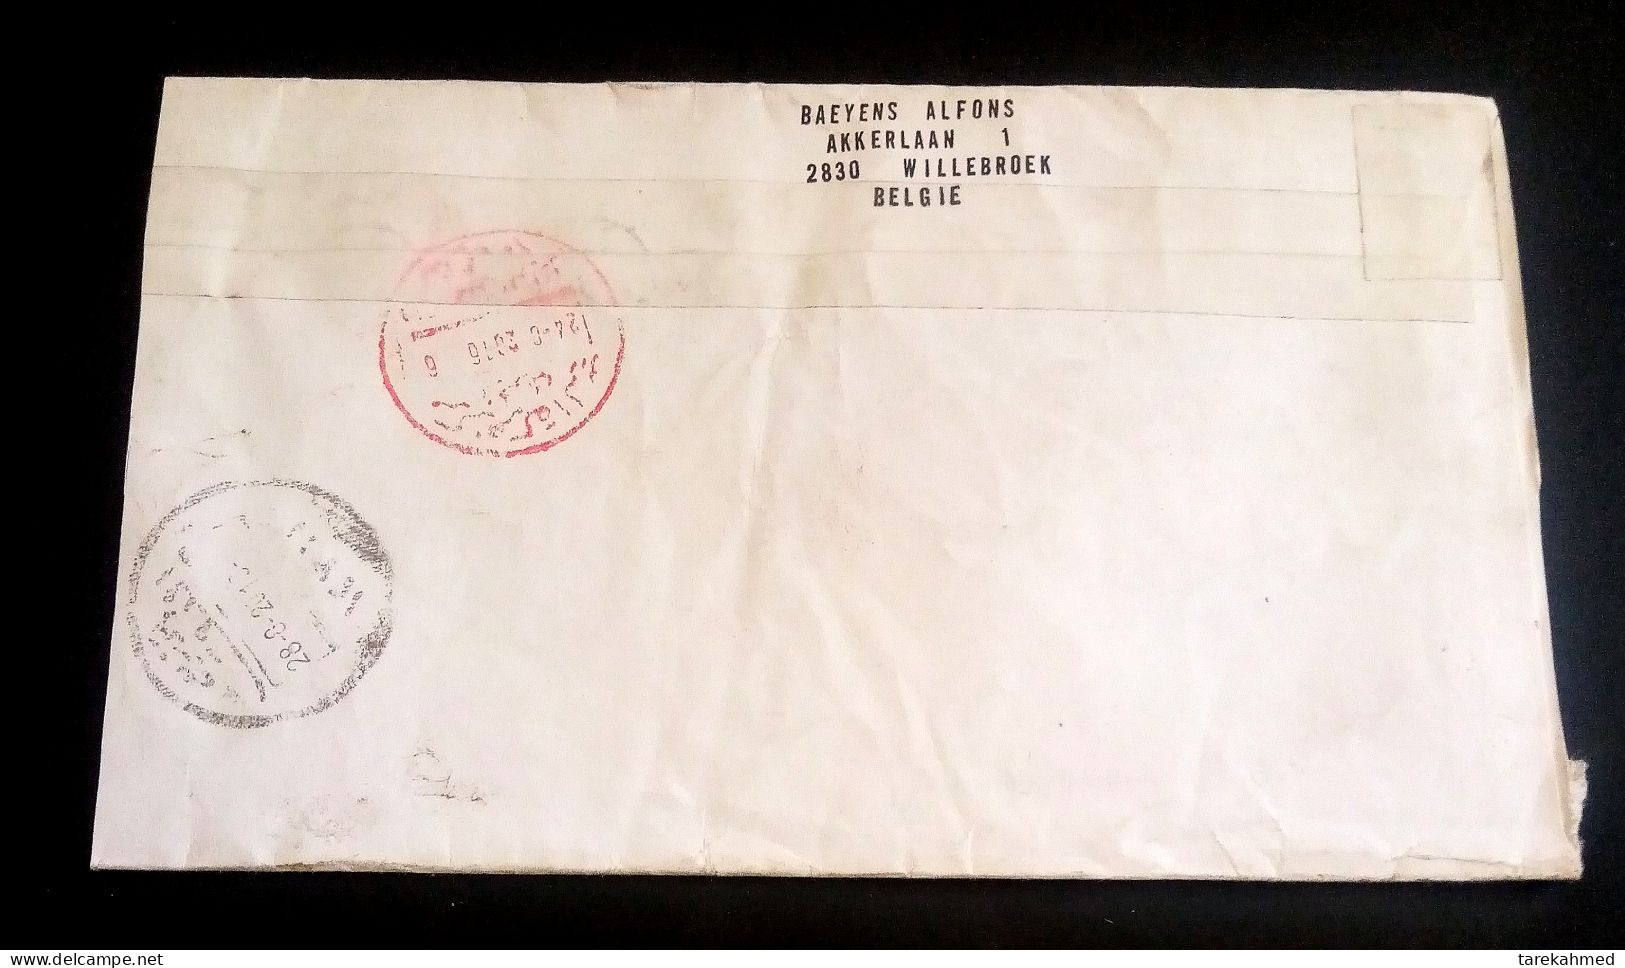 Egypt 2016, A Registered Mail Sent From Belgium To Egypt, Nice Cancels - Briefe U. Dokumente